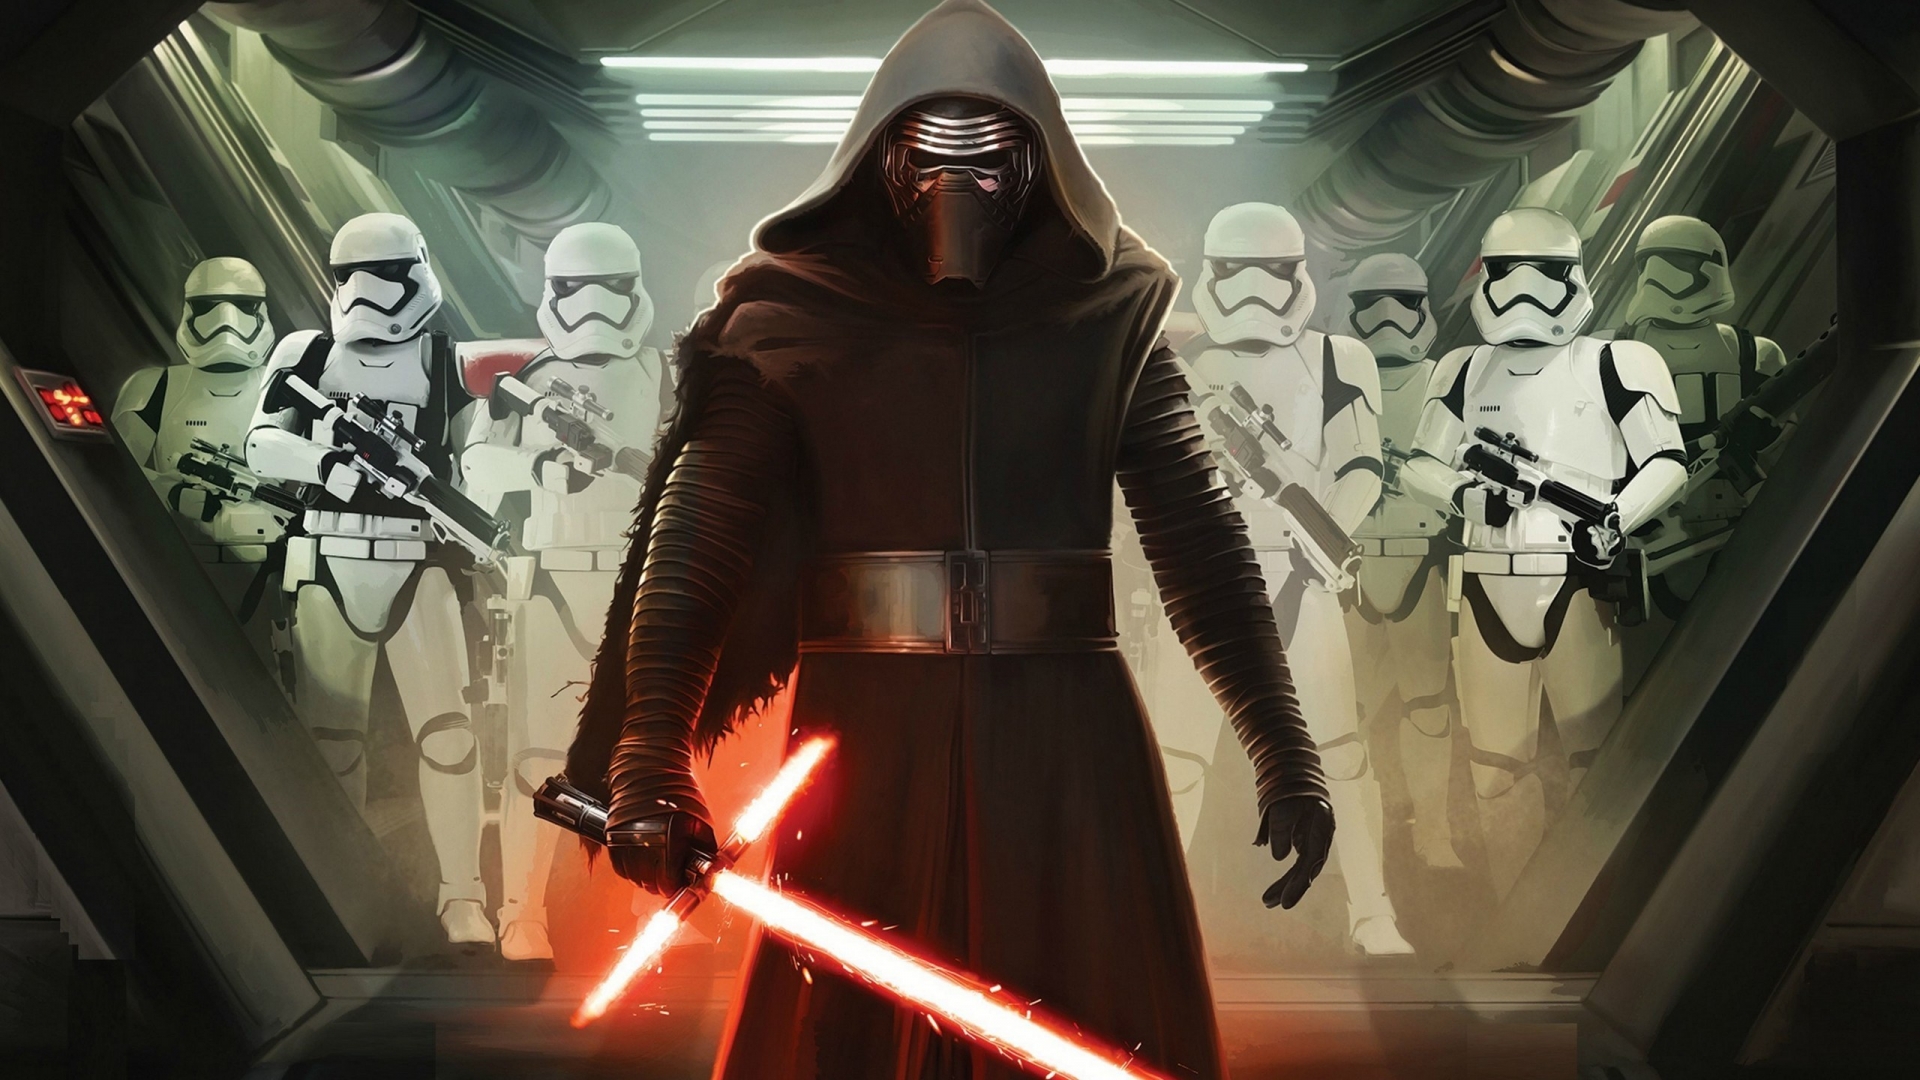 Star Wars VII Darth Vader and Storm Troopers for 1920 x 1080 HDTV 1080p resolution